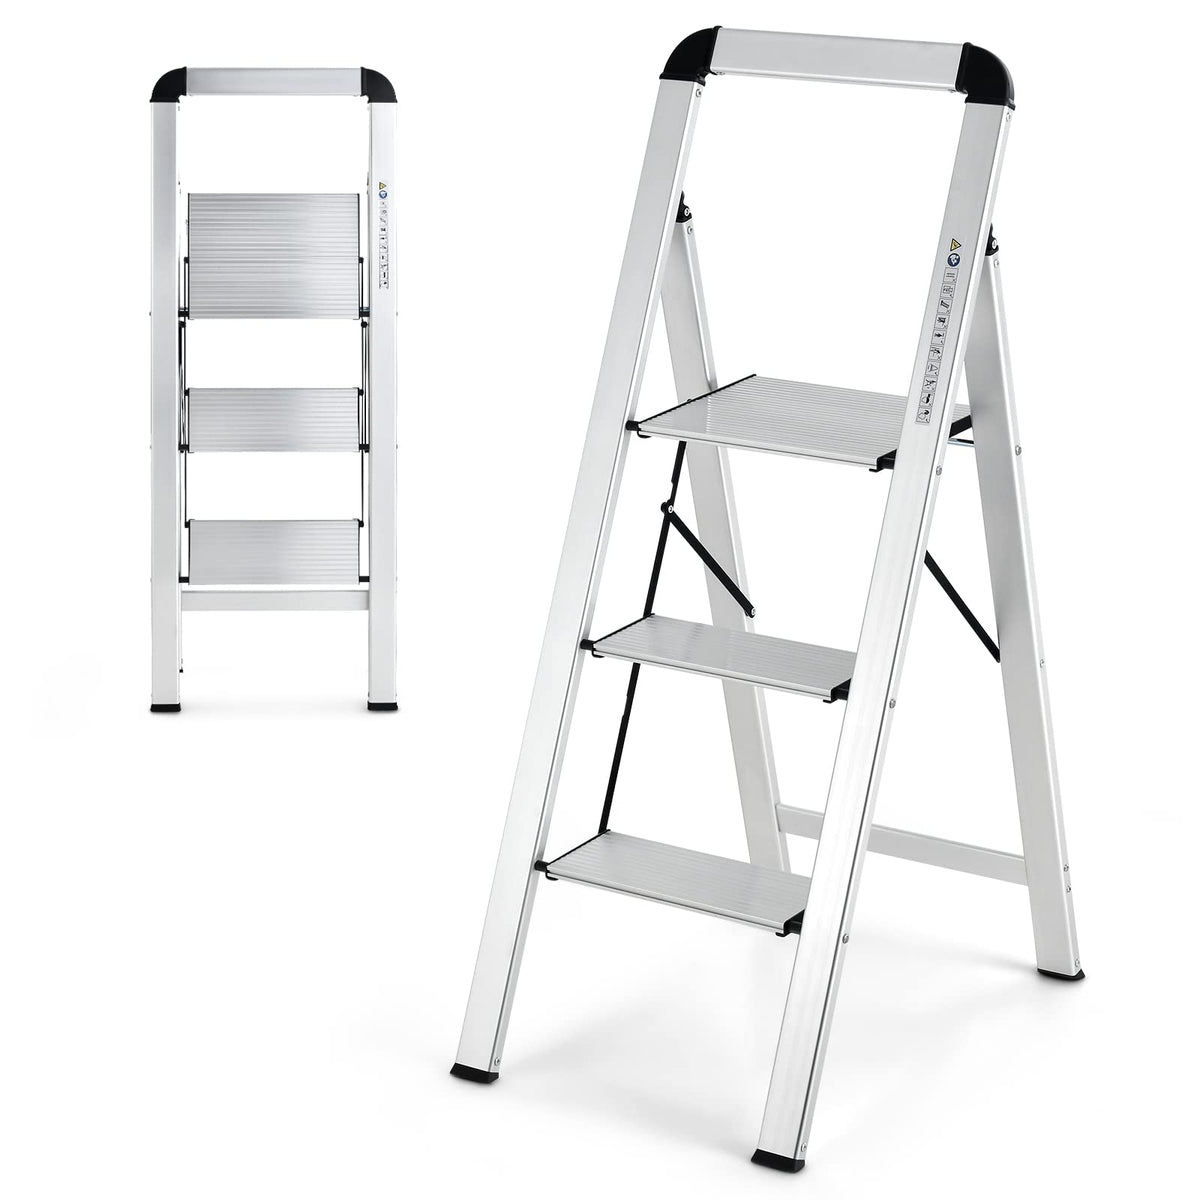 Goplus 3-Step Ladder, Aluminum Folding Step Stool w/Non-Slip Pedal & Footpads, Load up to 330 LBS